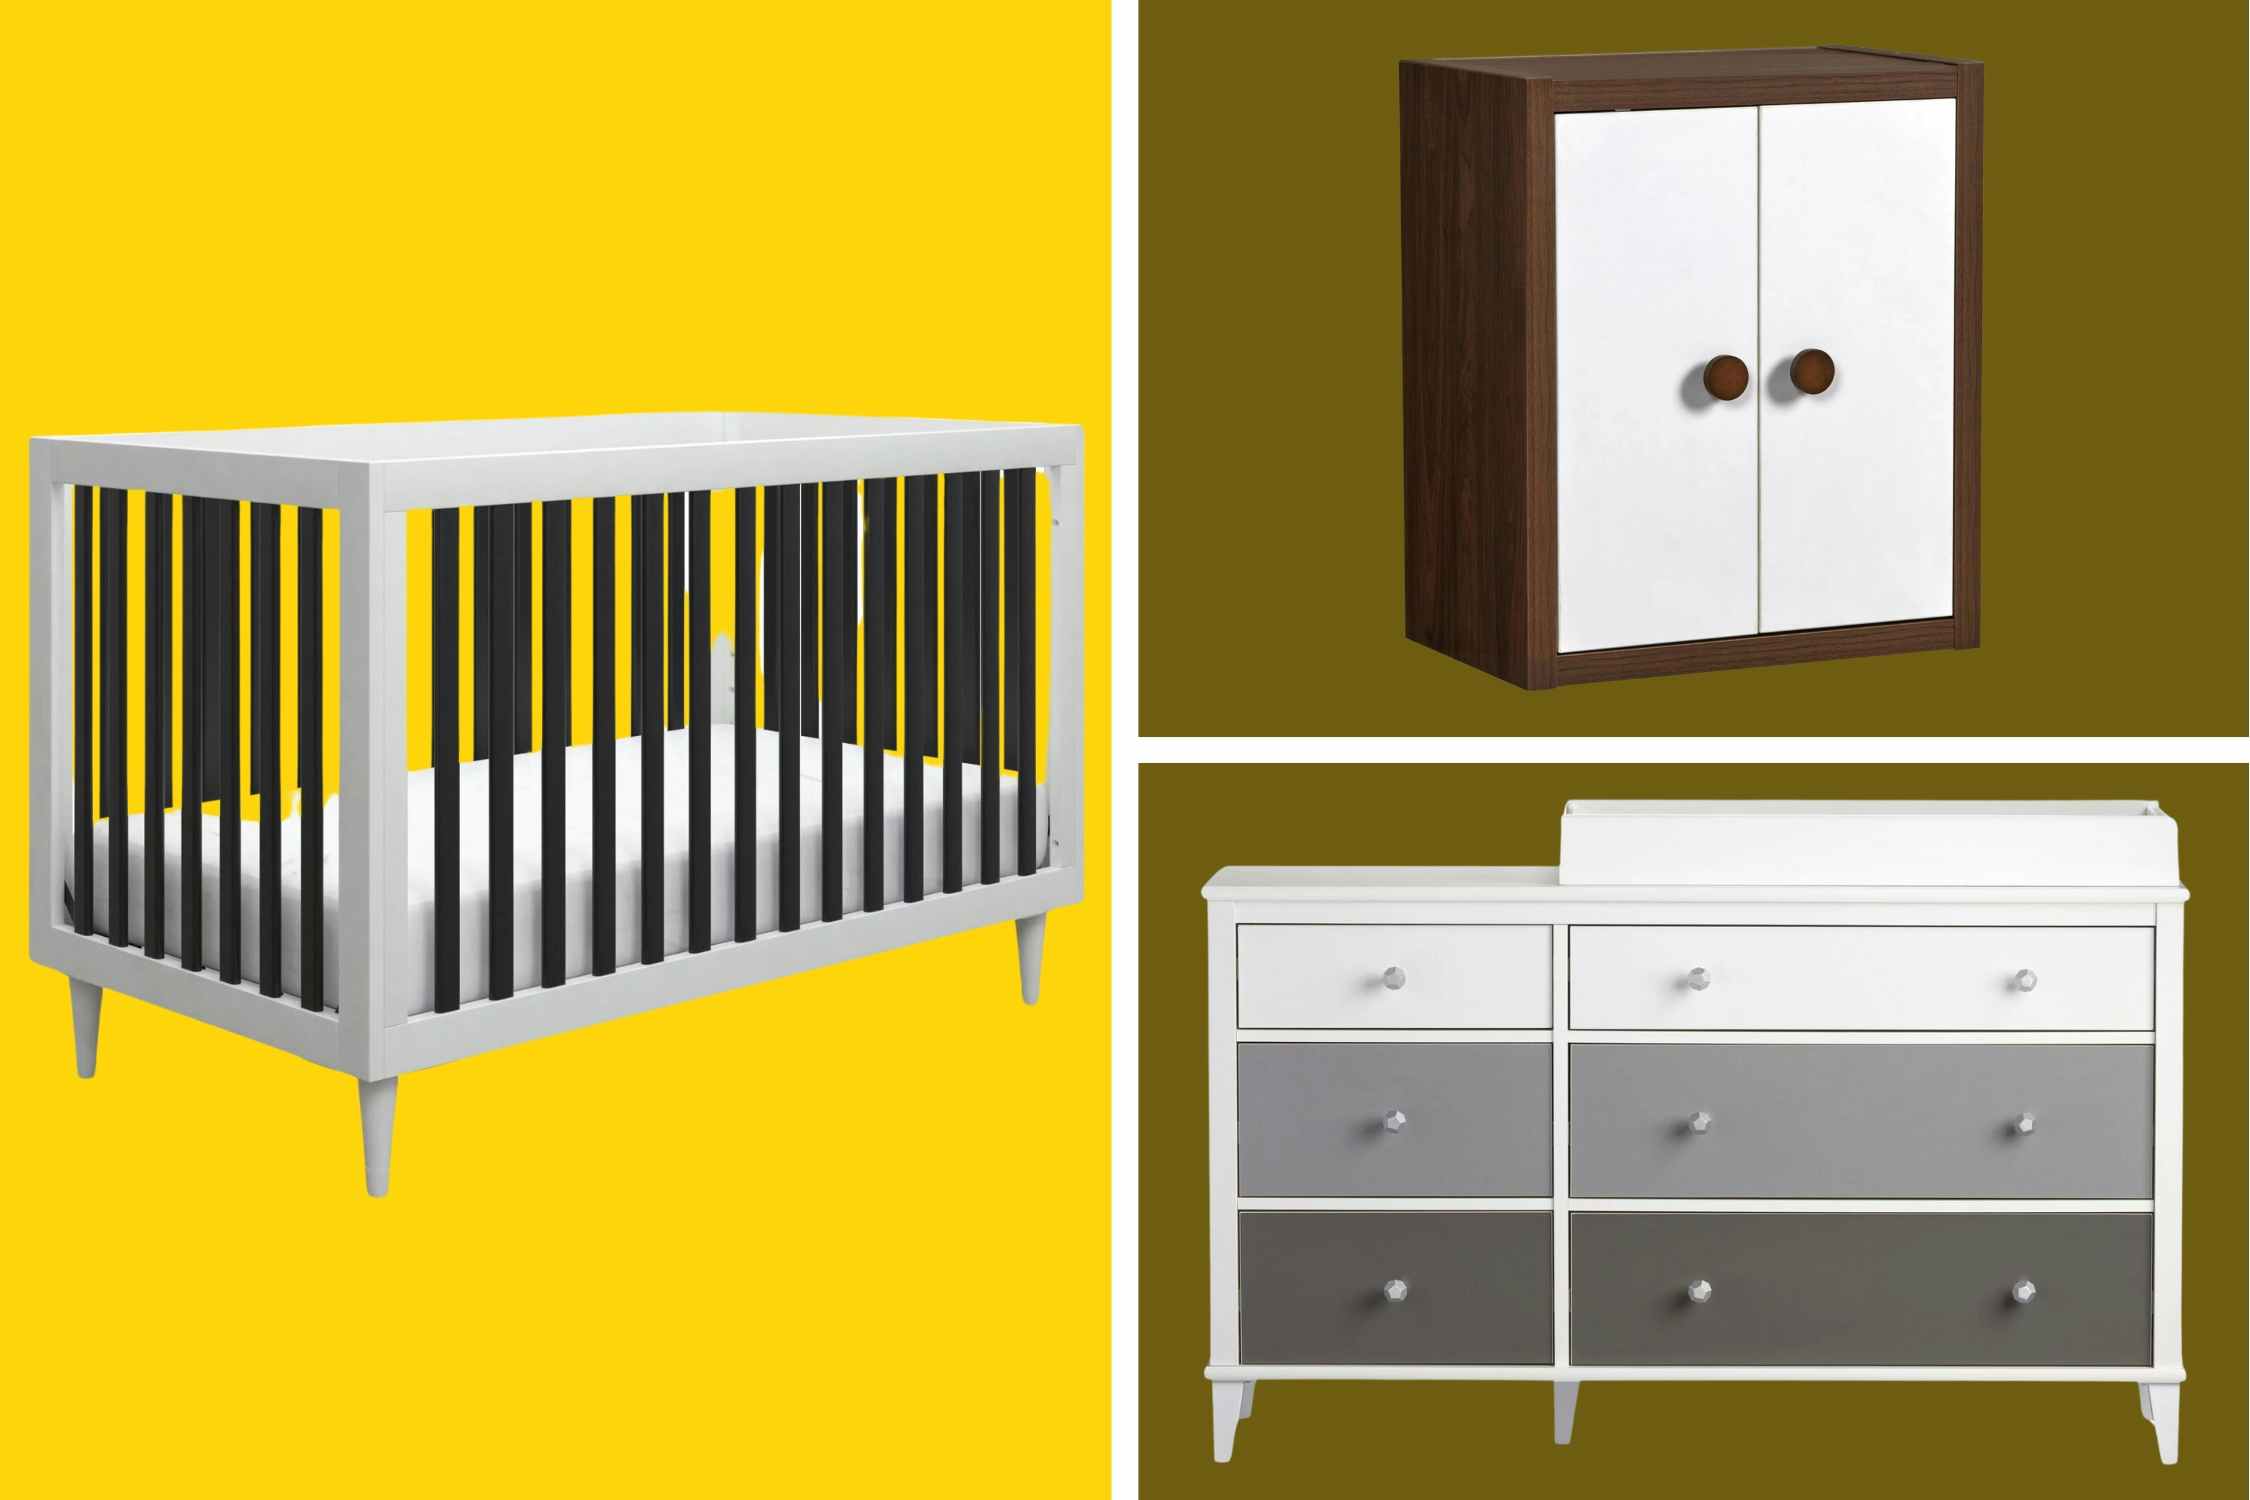 Furniture Pieces for Kids’ Bedrooms and Baby Nurseries at Walmart From $35